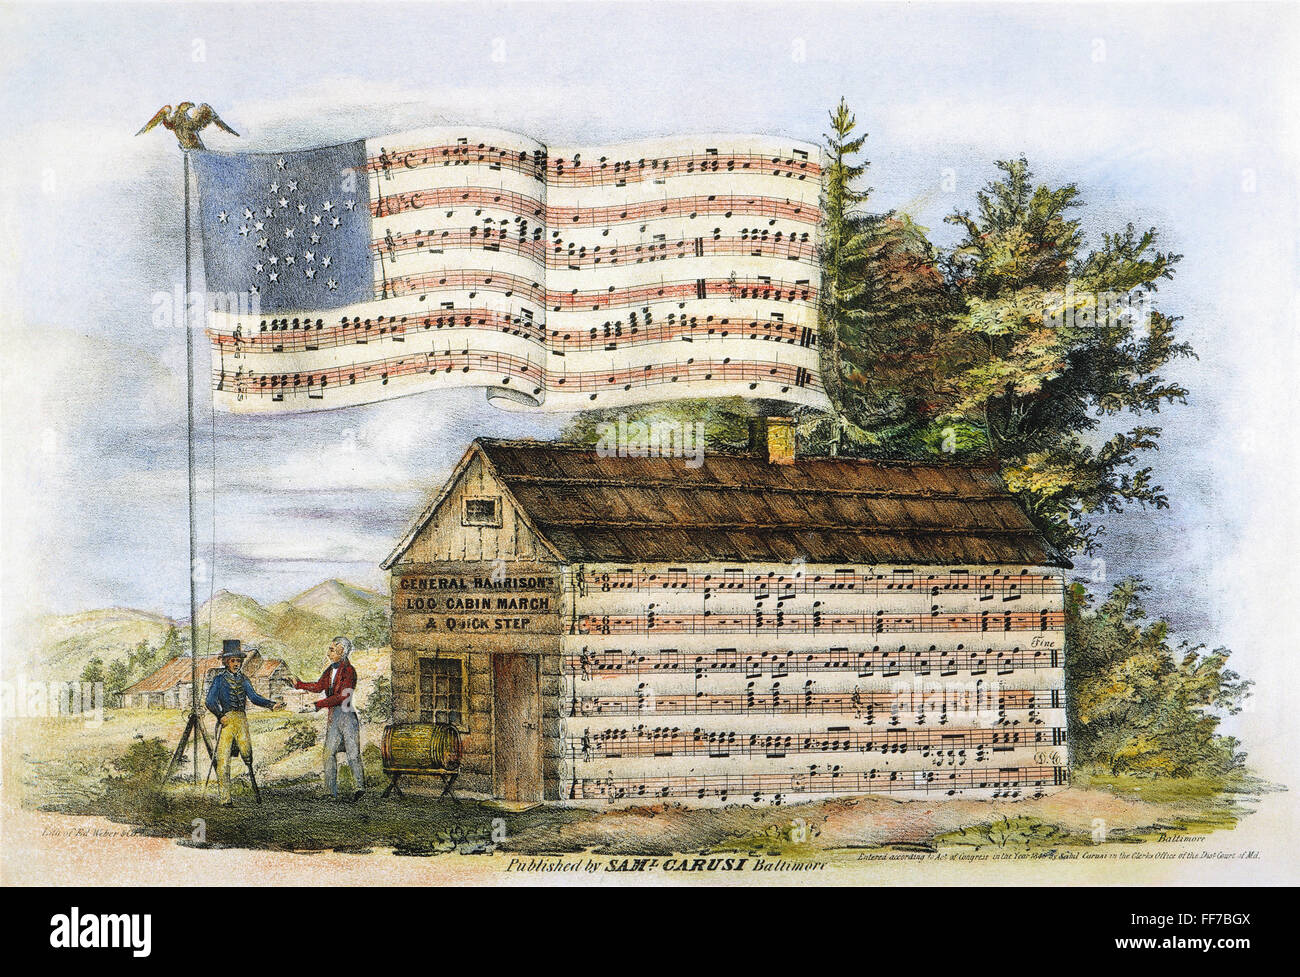 HARRISON'S LOG CABIN MARCH /n1840. Lithograph cover of a song sheet favoring the presidential candidacy of William Henry Harrison, 1840. Stock Photo